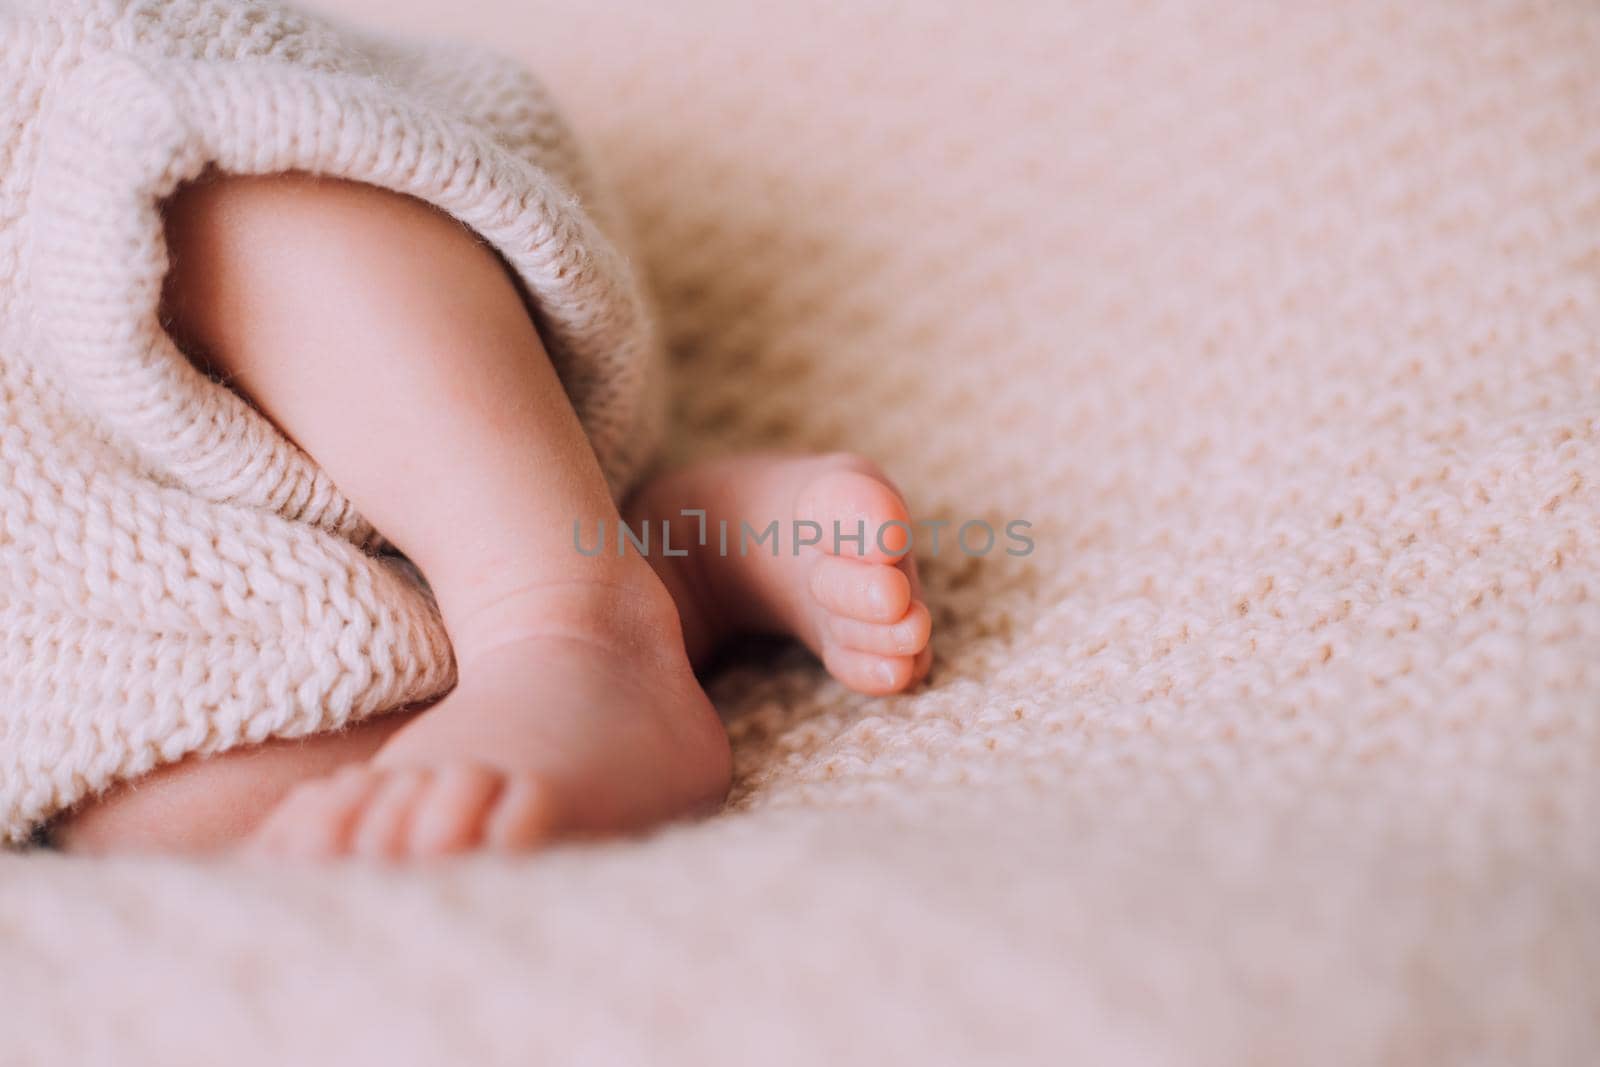 Legs of a newborn baby lifestyle . A small child. An article about newborns. Article about children's foot massage